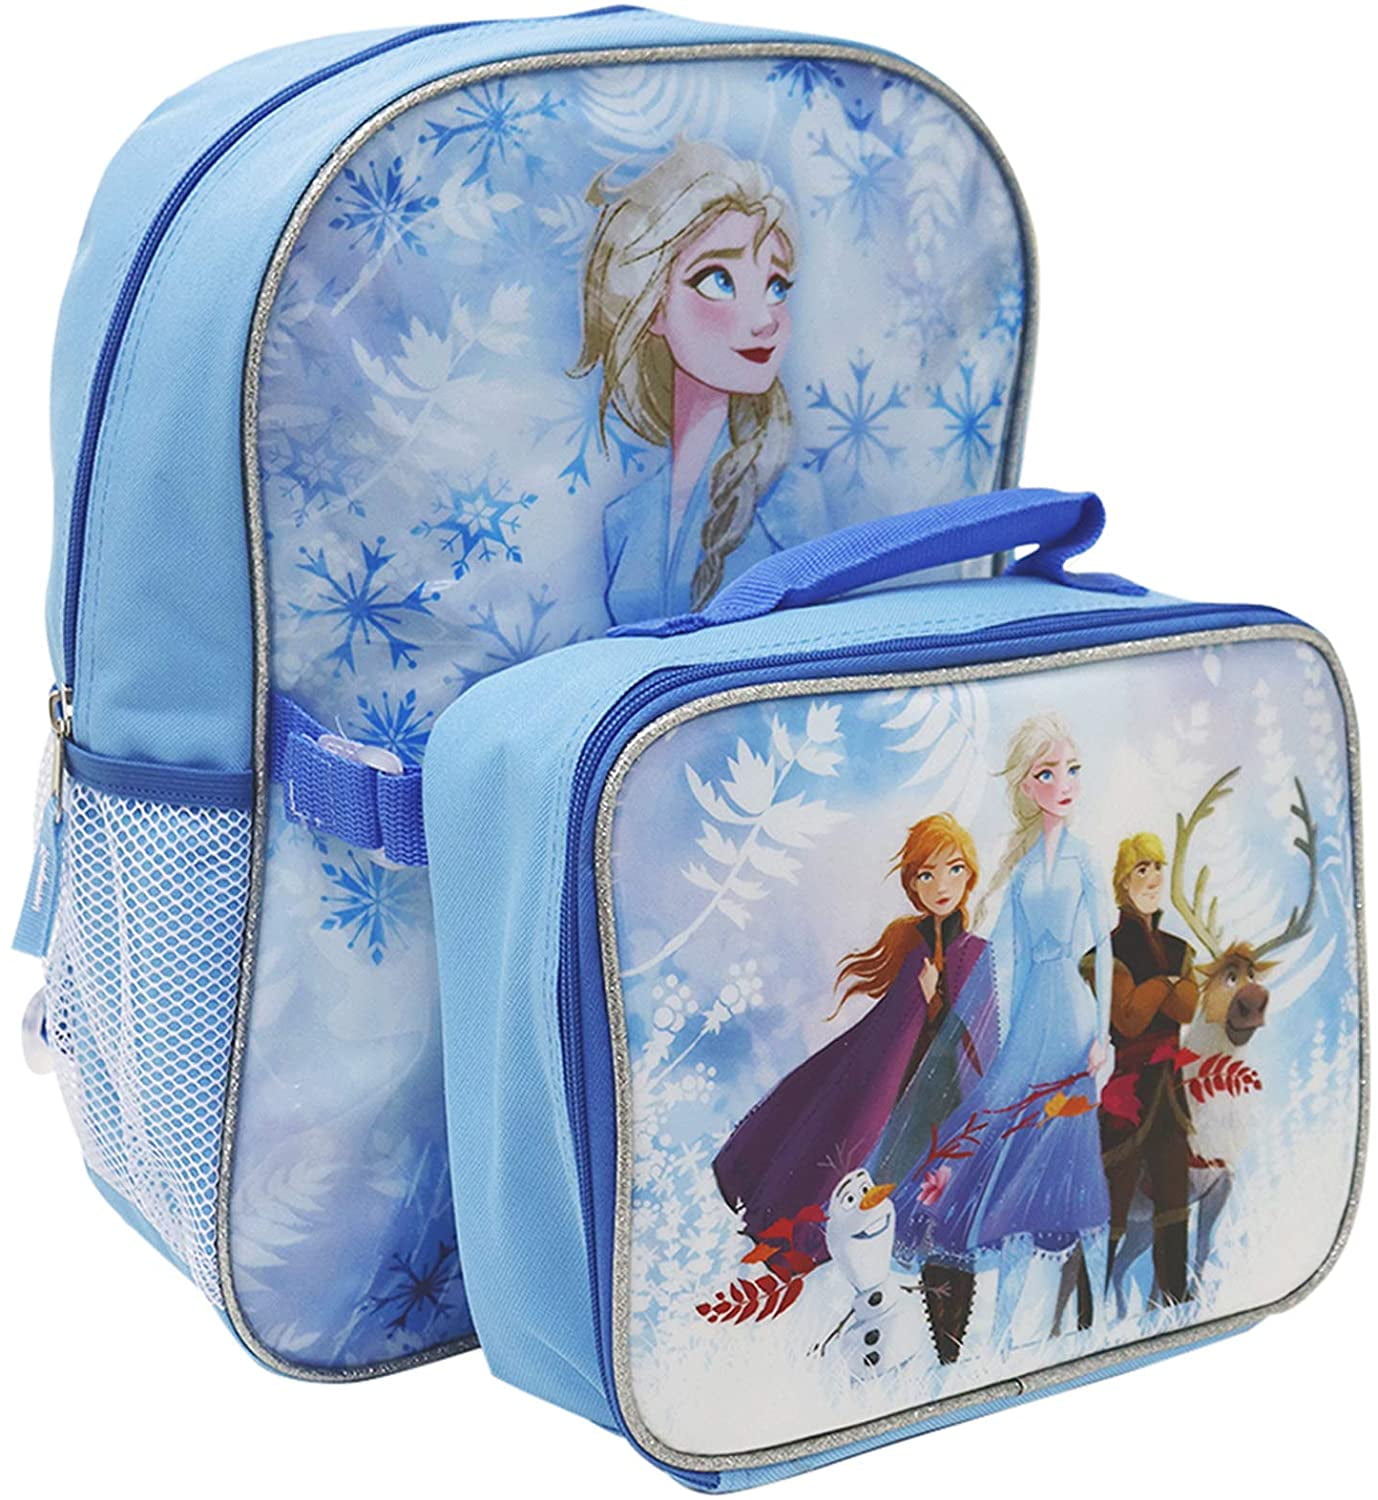 Disney Frozen Olaf 12" Small School Backpack Lunch Bag 2pc Set 